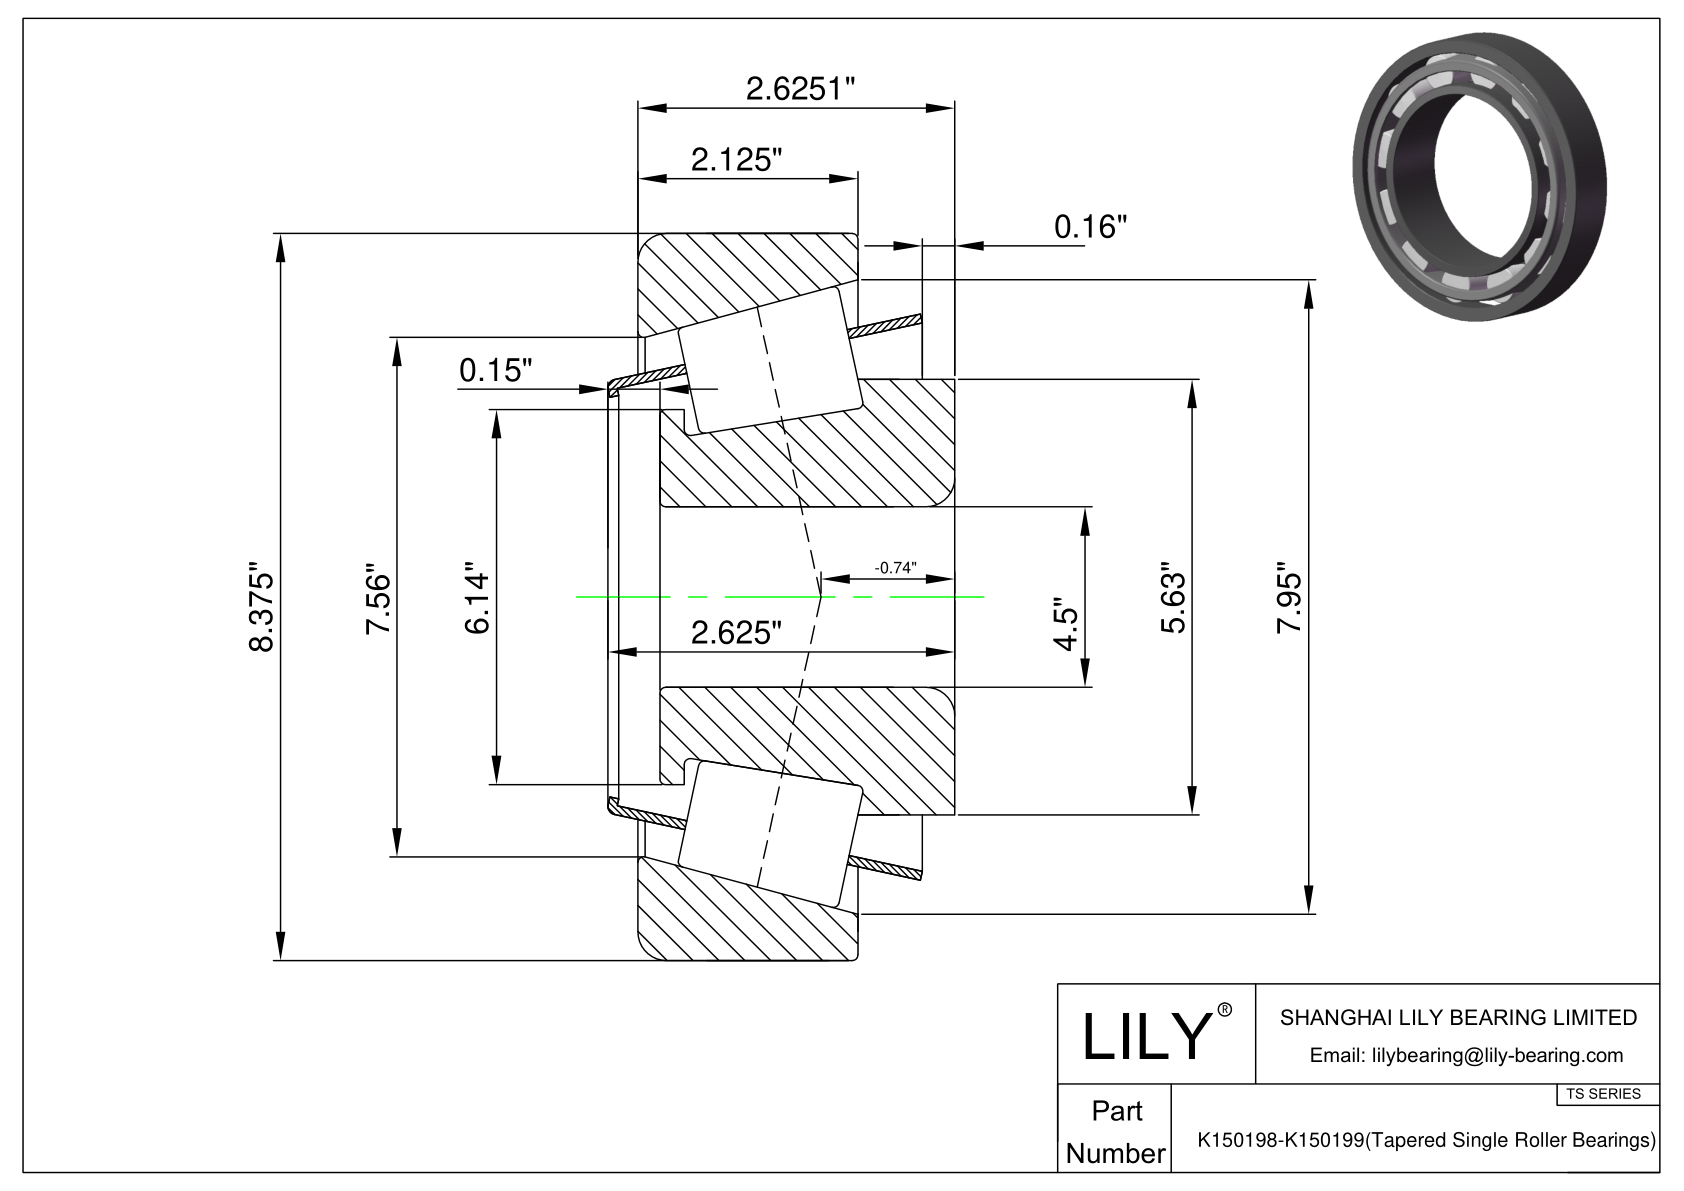 K150198-K150199 TS (Tapered Single Roller Bearings) (Imperial) cad drawing